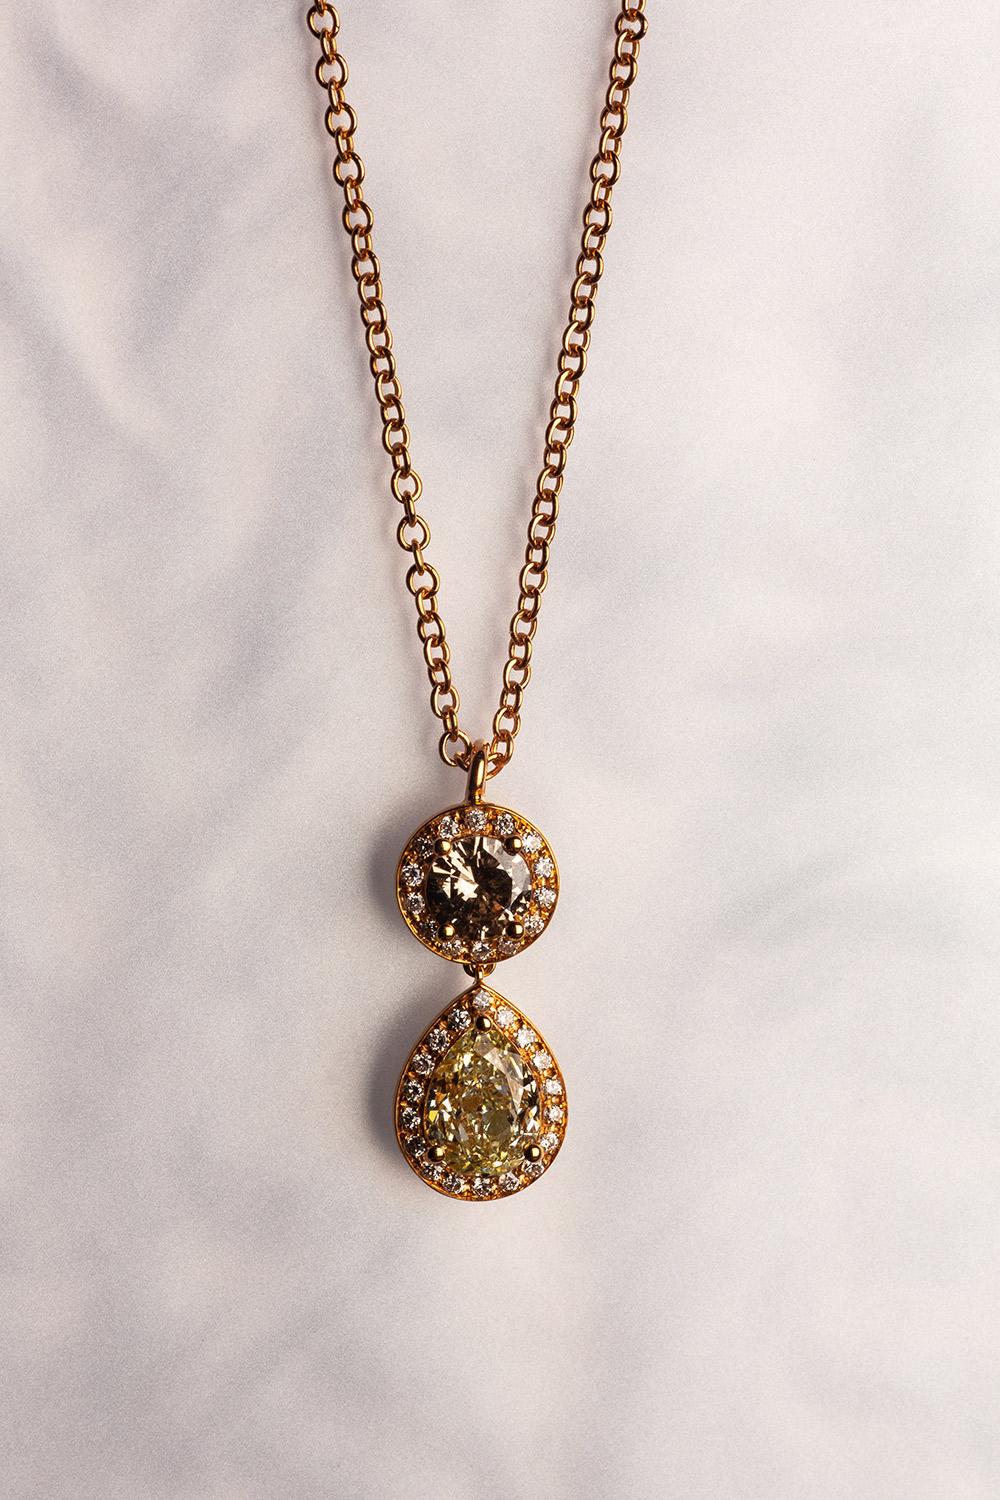 This 18K yellow gold elegant pendant is from our Divine Collection. It is made of a round brown diamond in total of 0.38 Carat and pear shape yellow diamond in total of 1.02 Carat. Both diamonds are decorated by round colourless diamonds in total of